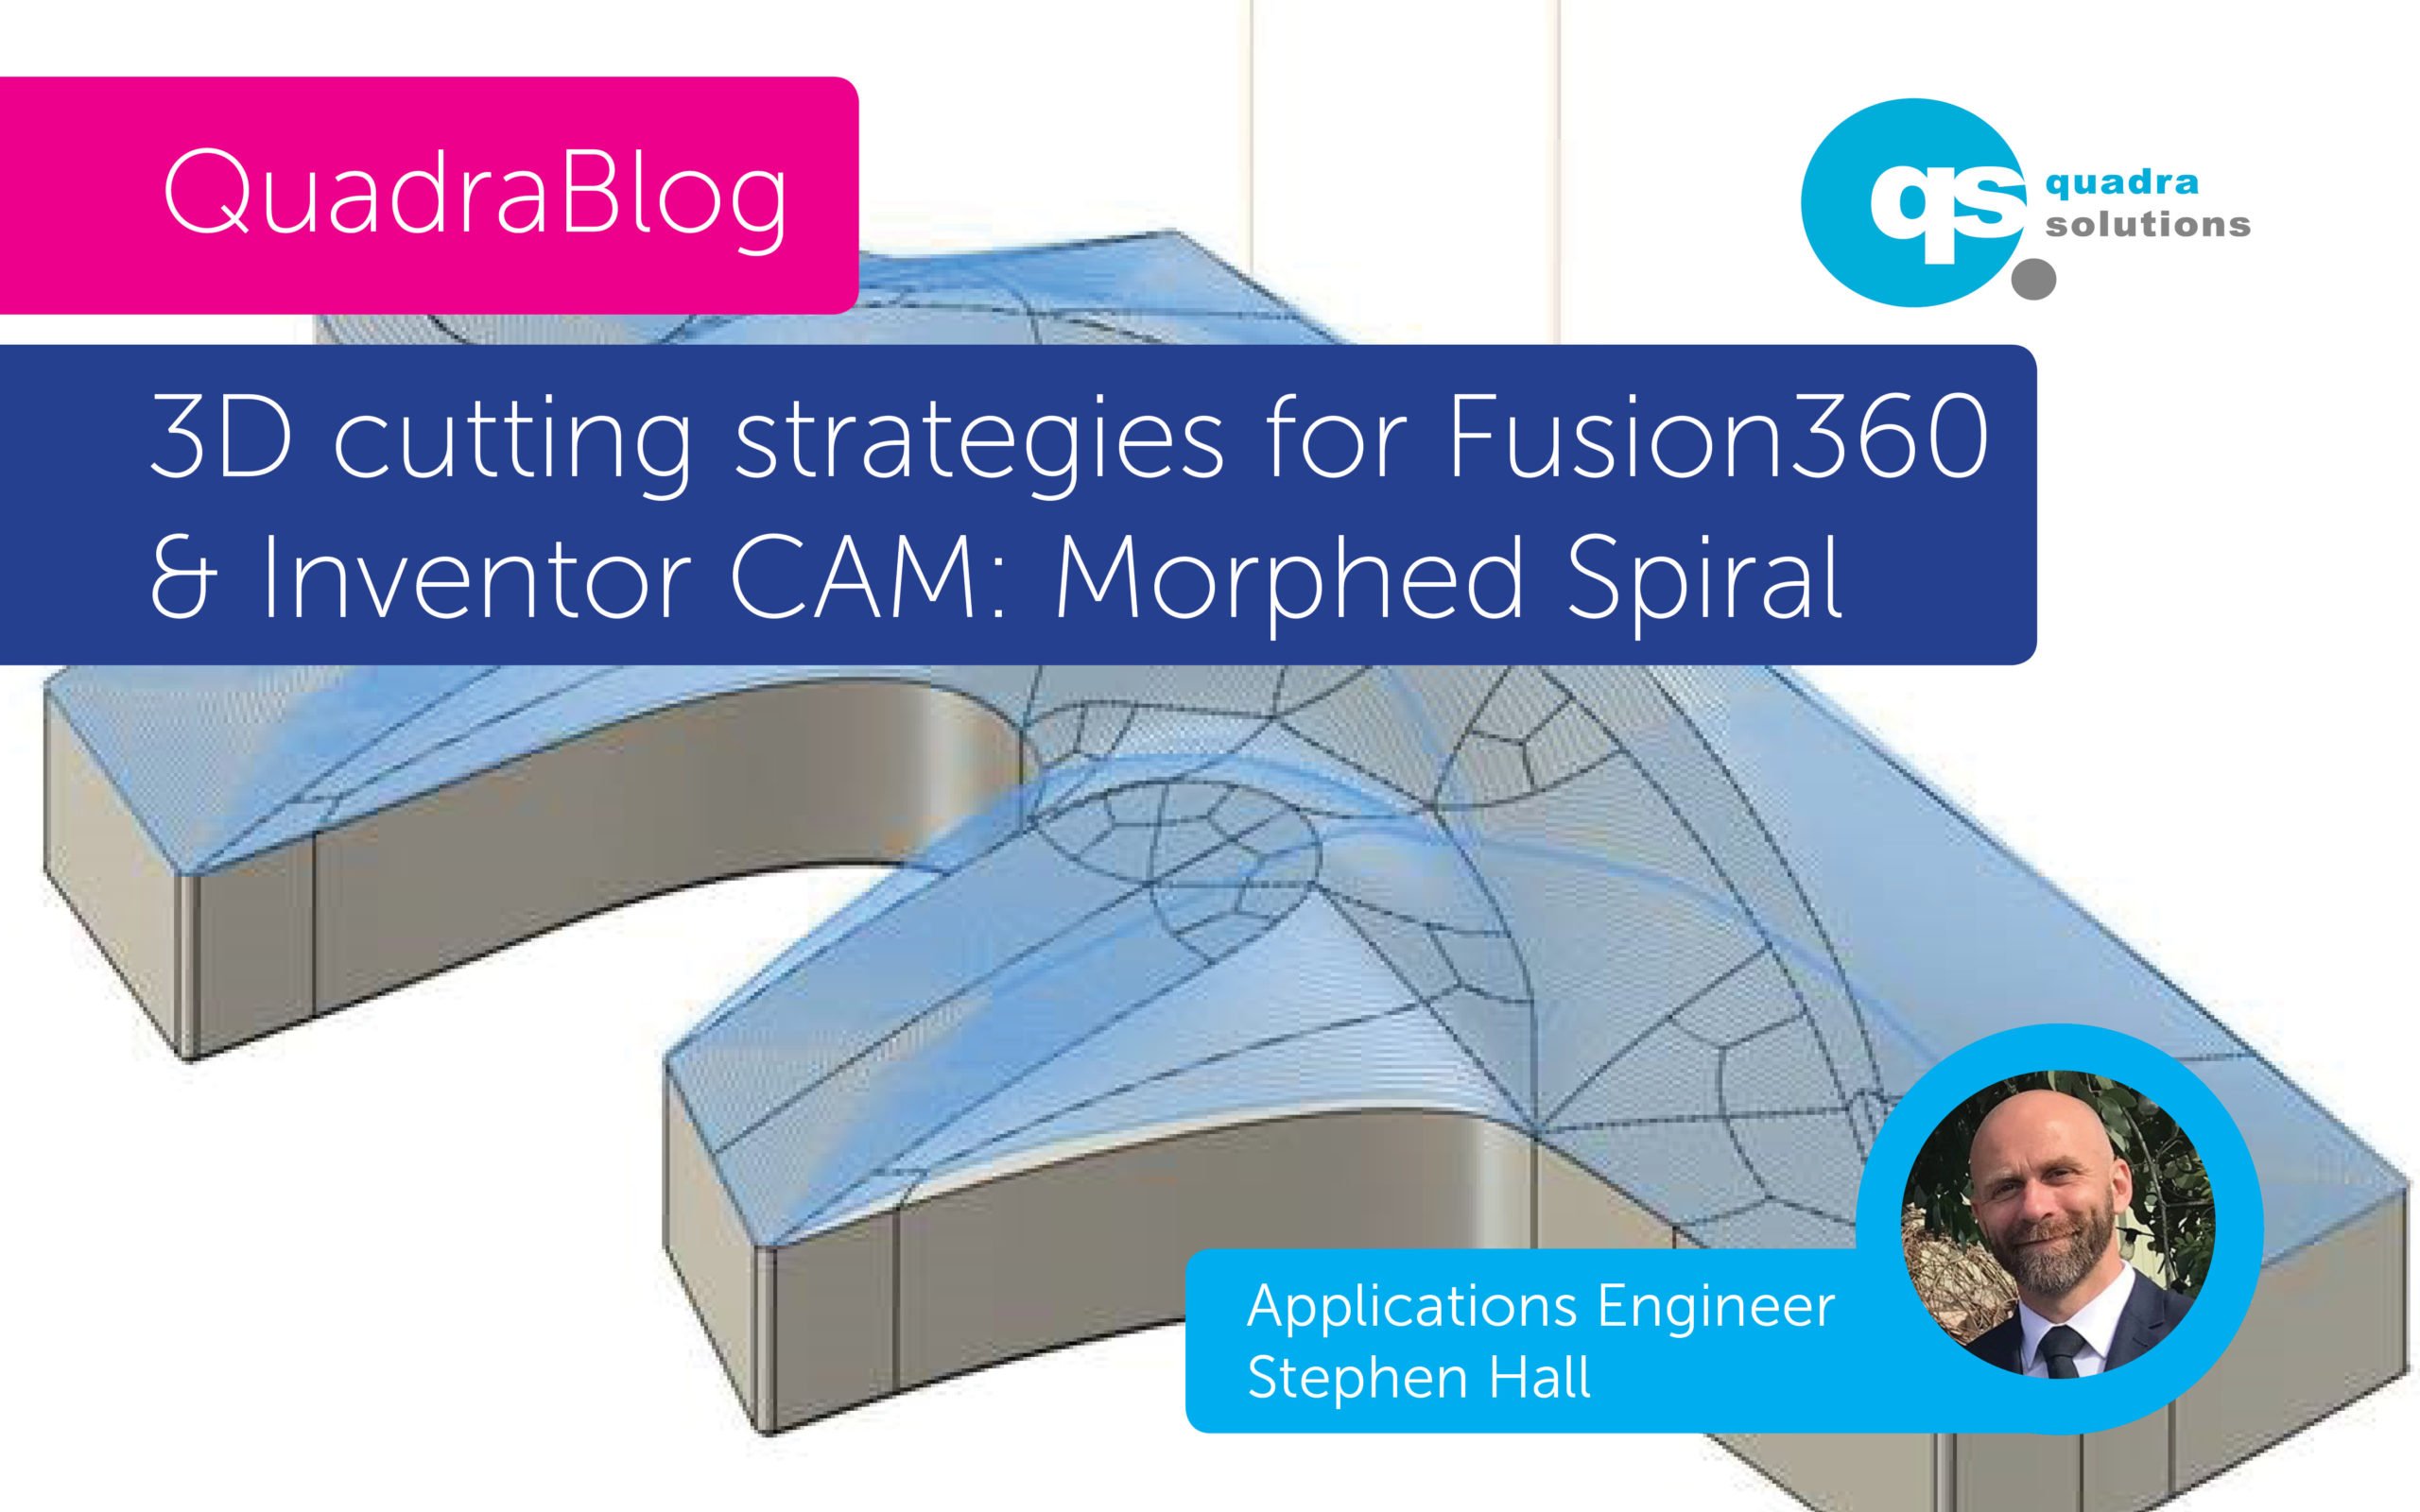 3D cutting strategies for Fusion 360/Inventor CAM: Morphed Spiral